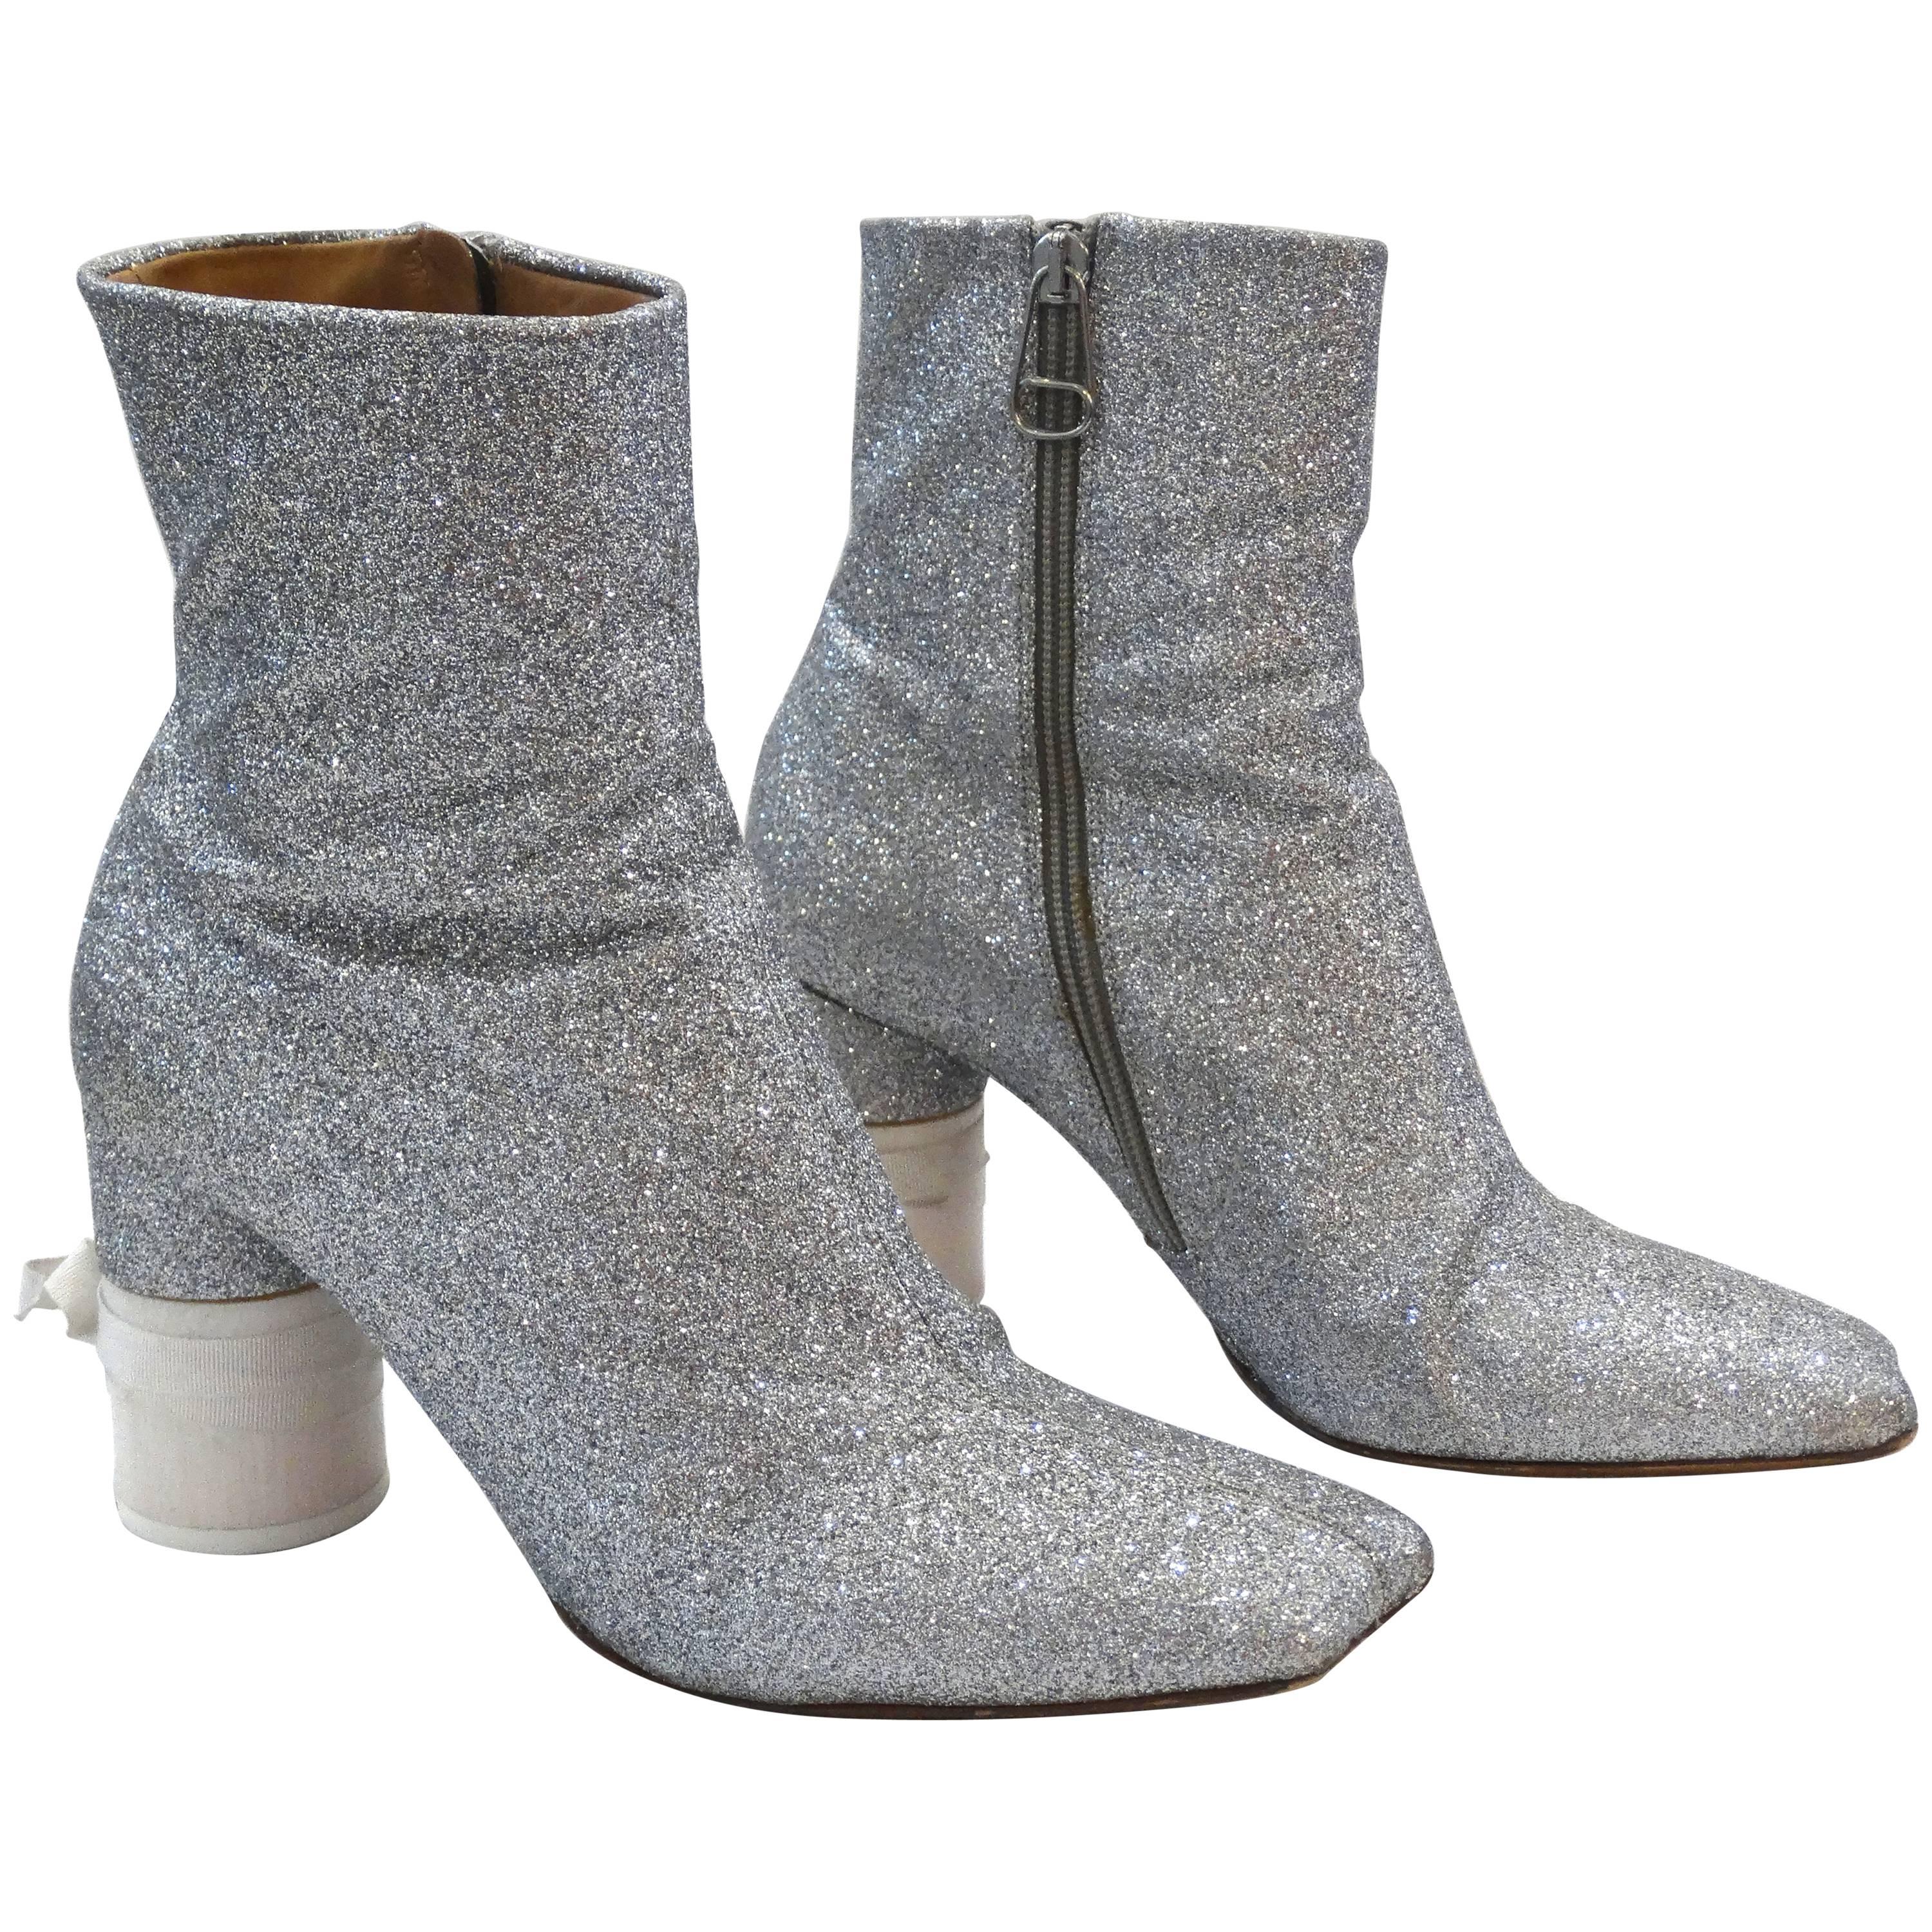 Coveted Maison Martin Margiela Silver Glitter Heeled Boots